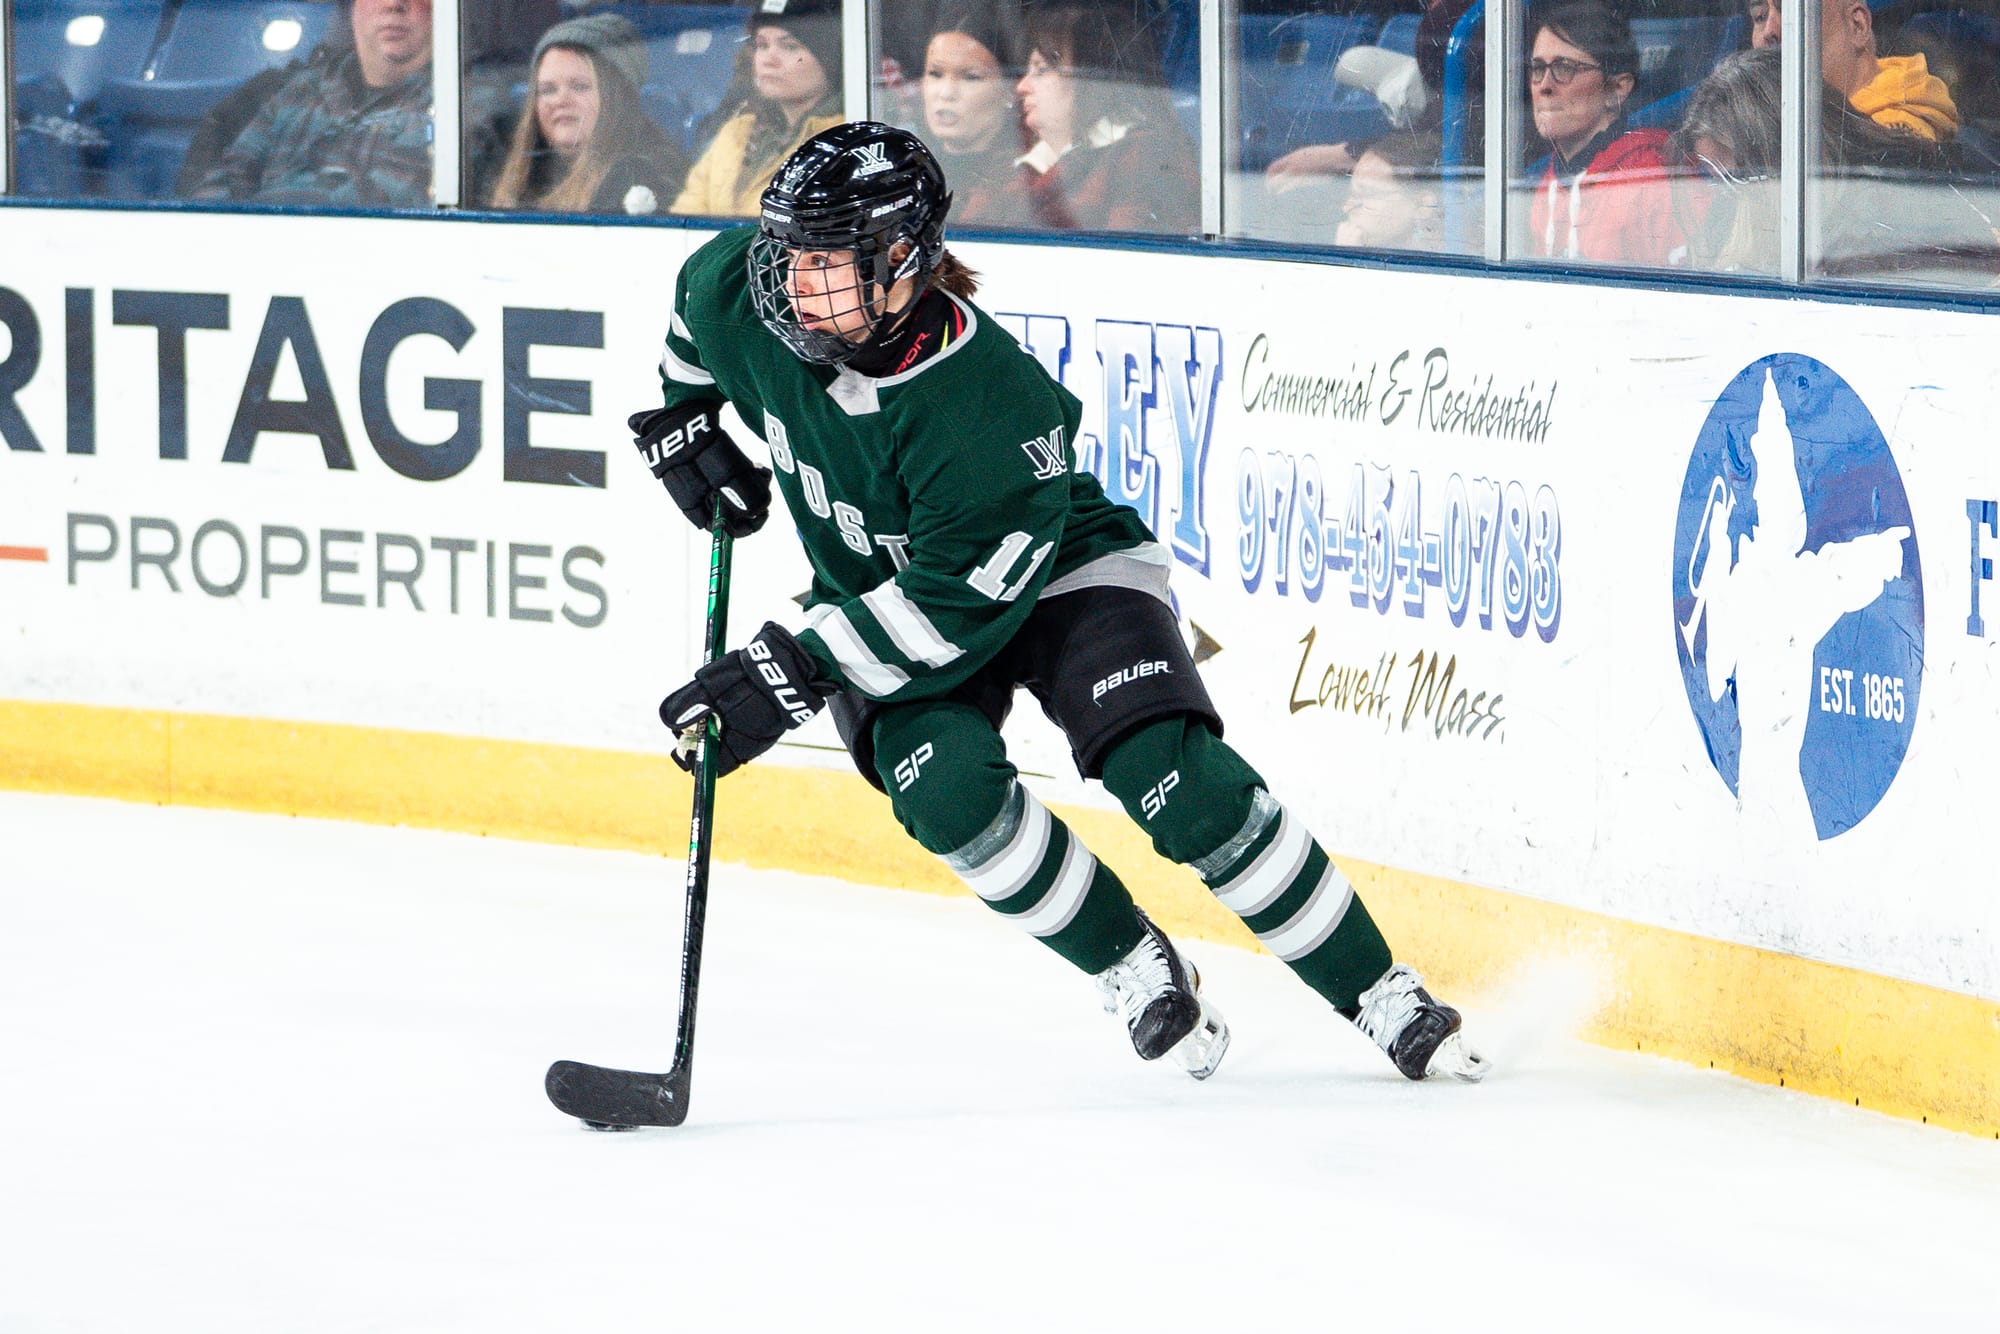 Alina Müller, wearing a green home uniform, skates with the puck during a game. 